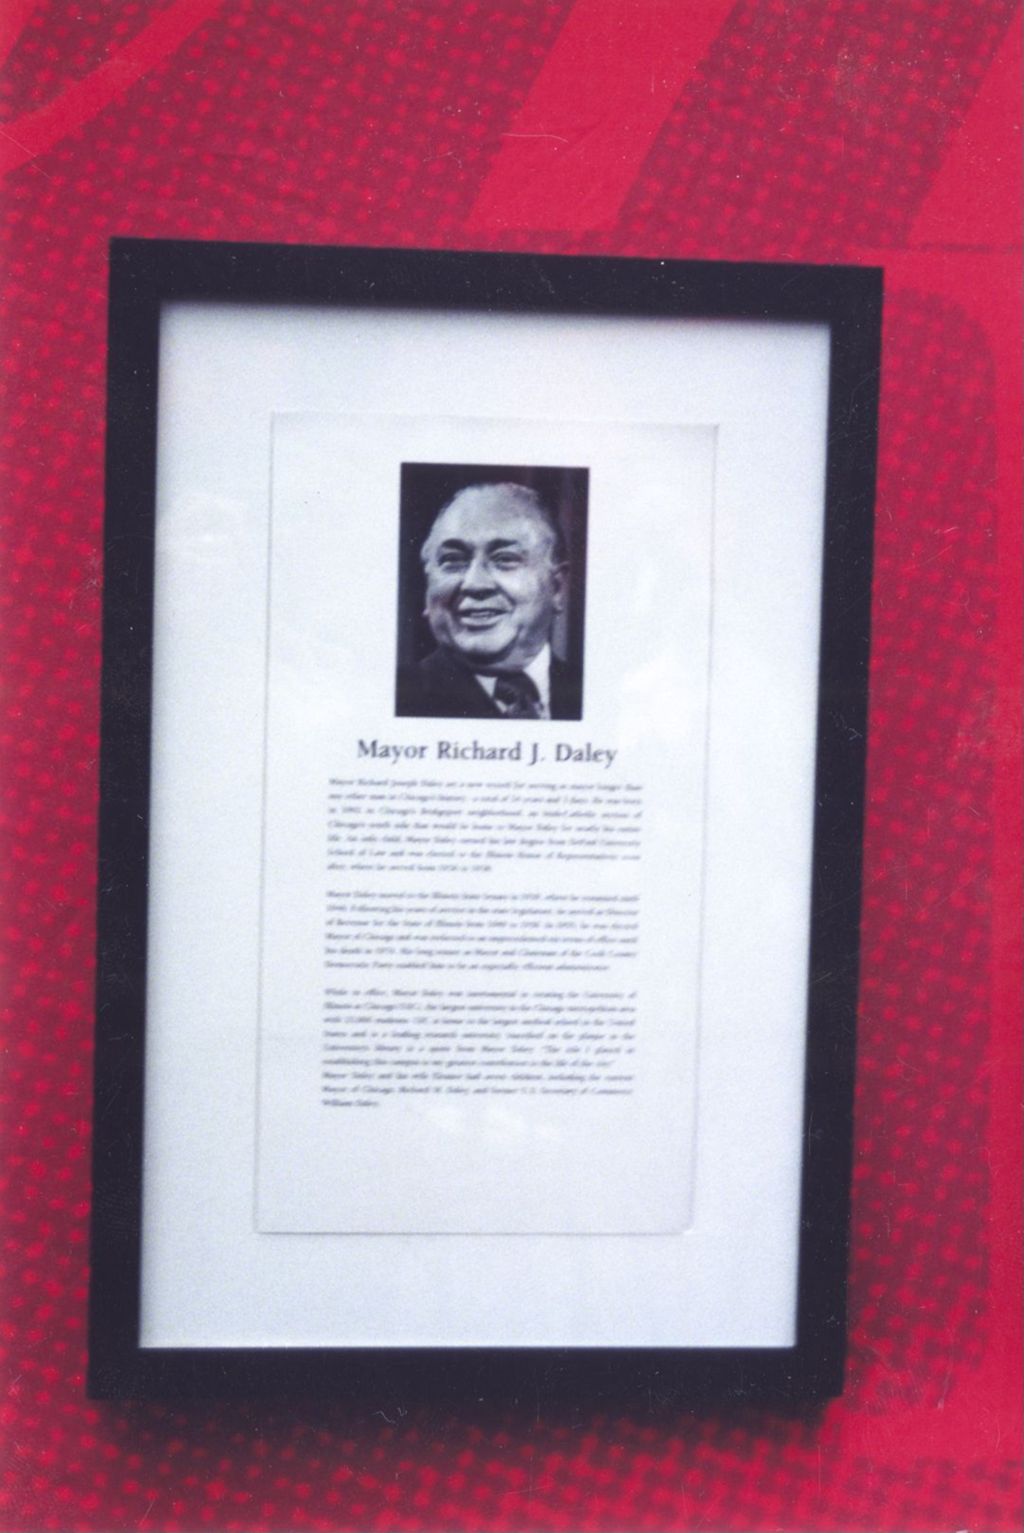 Miniature of Framed memorial tribute to Richard J. Daley